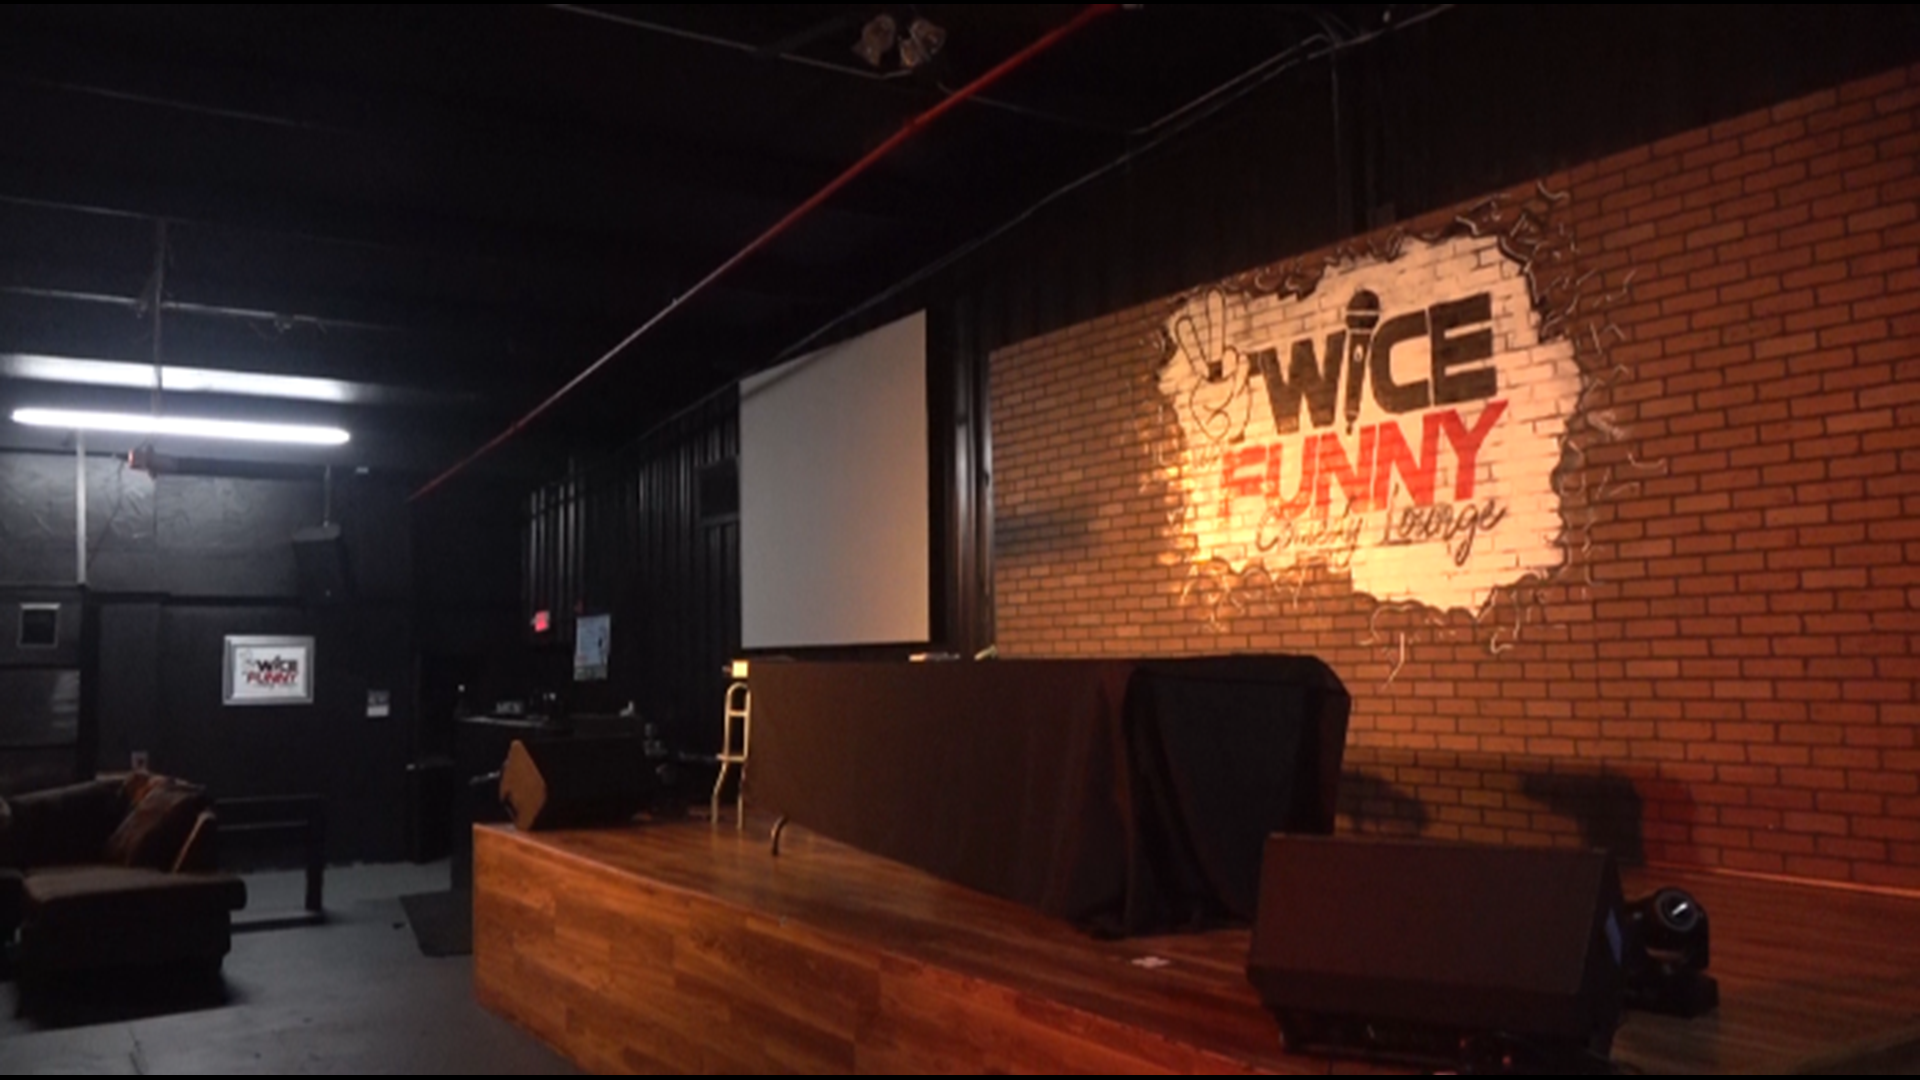 Twice as Funny Comedy Lounge had to defend itself on Facebook after a TikTok video implied it was the location of a Killeen shooting.